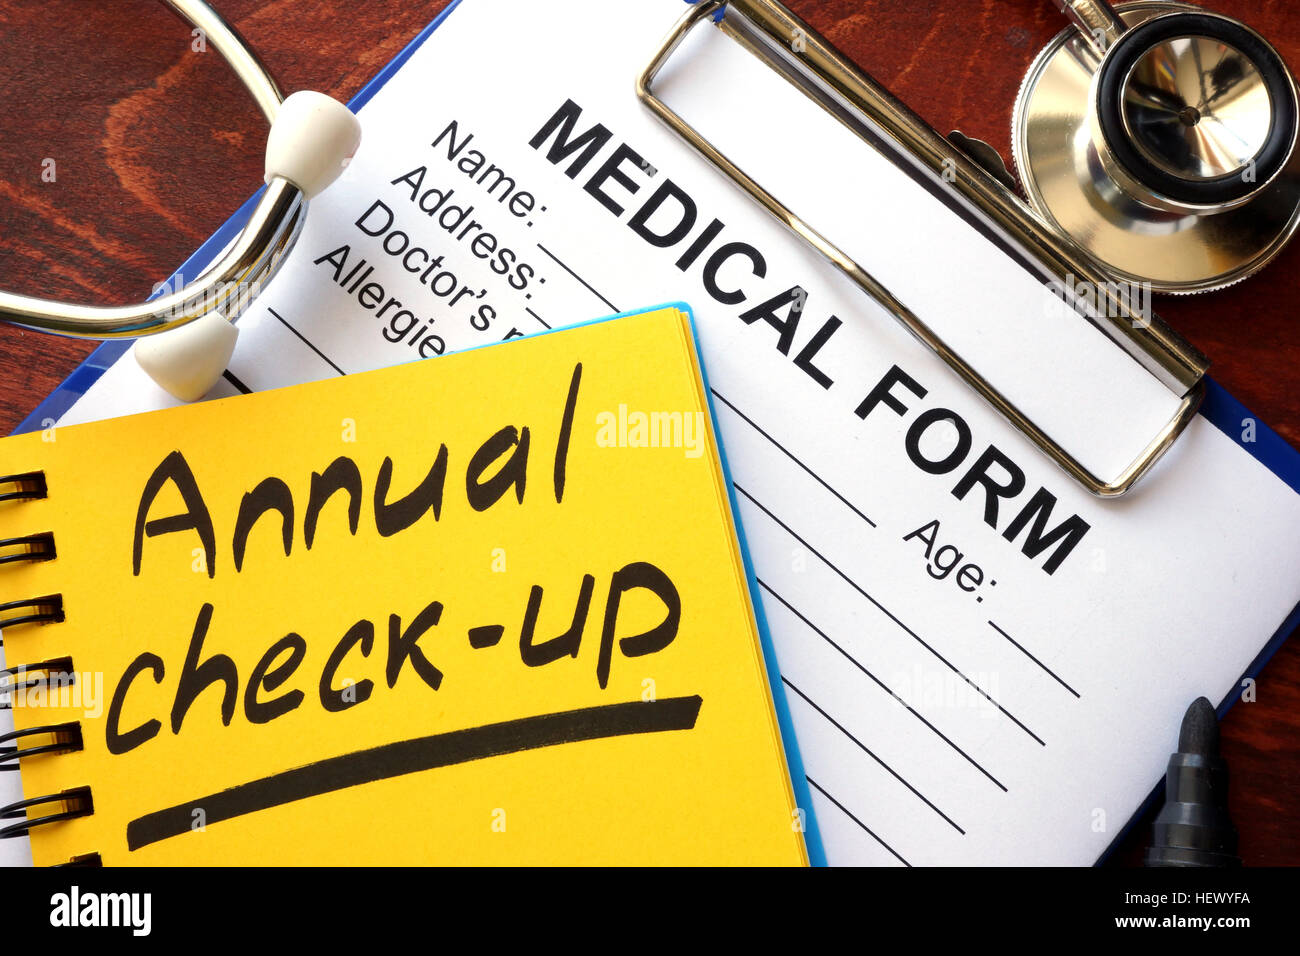 Annual check-up in a note and medical form. Stock Photo